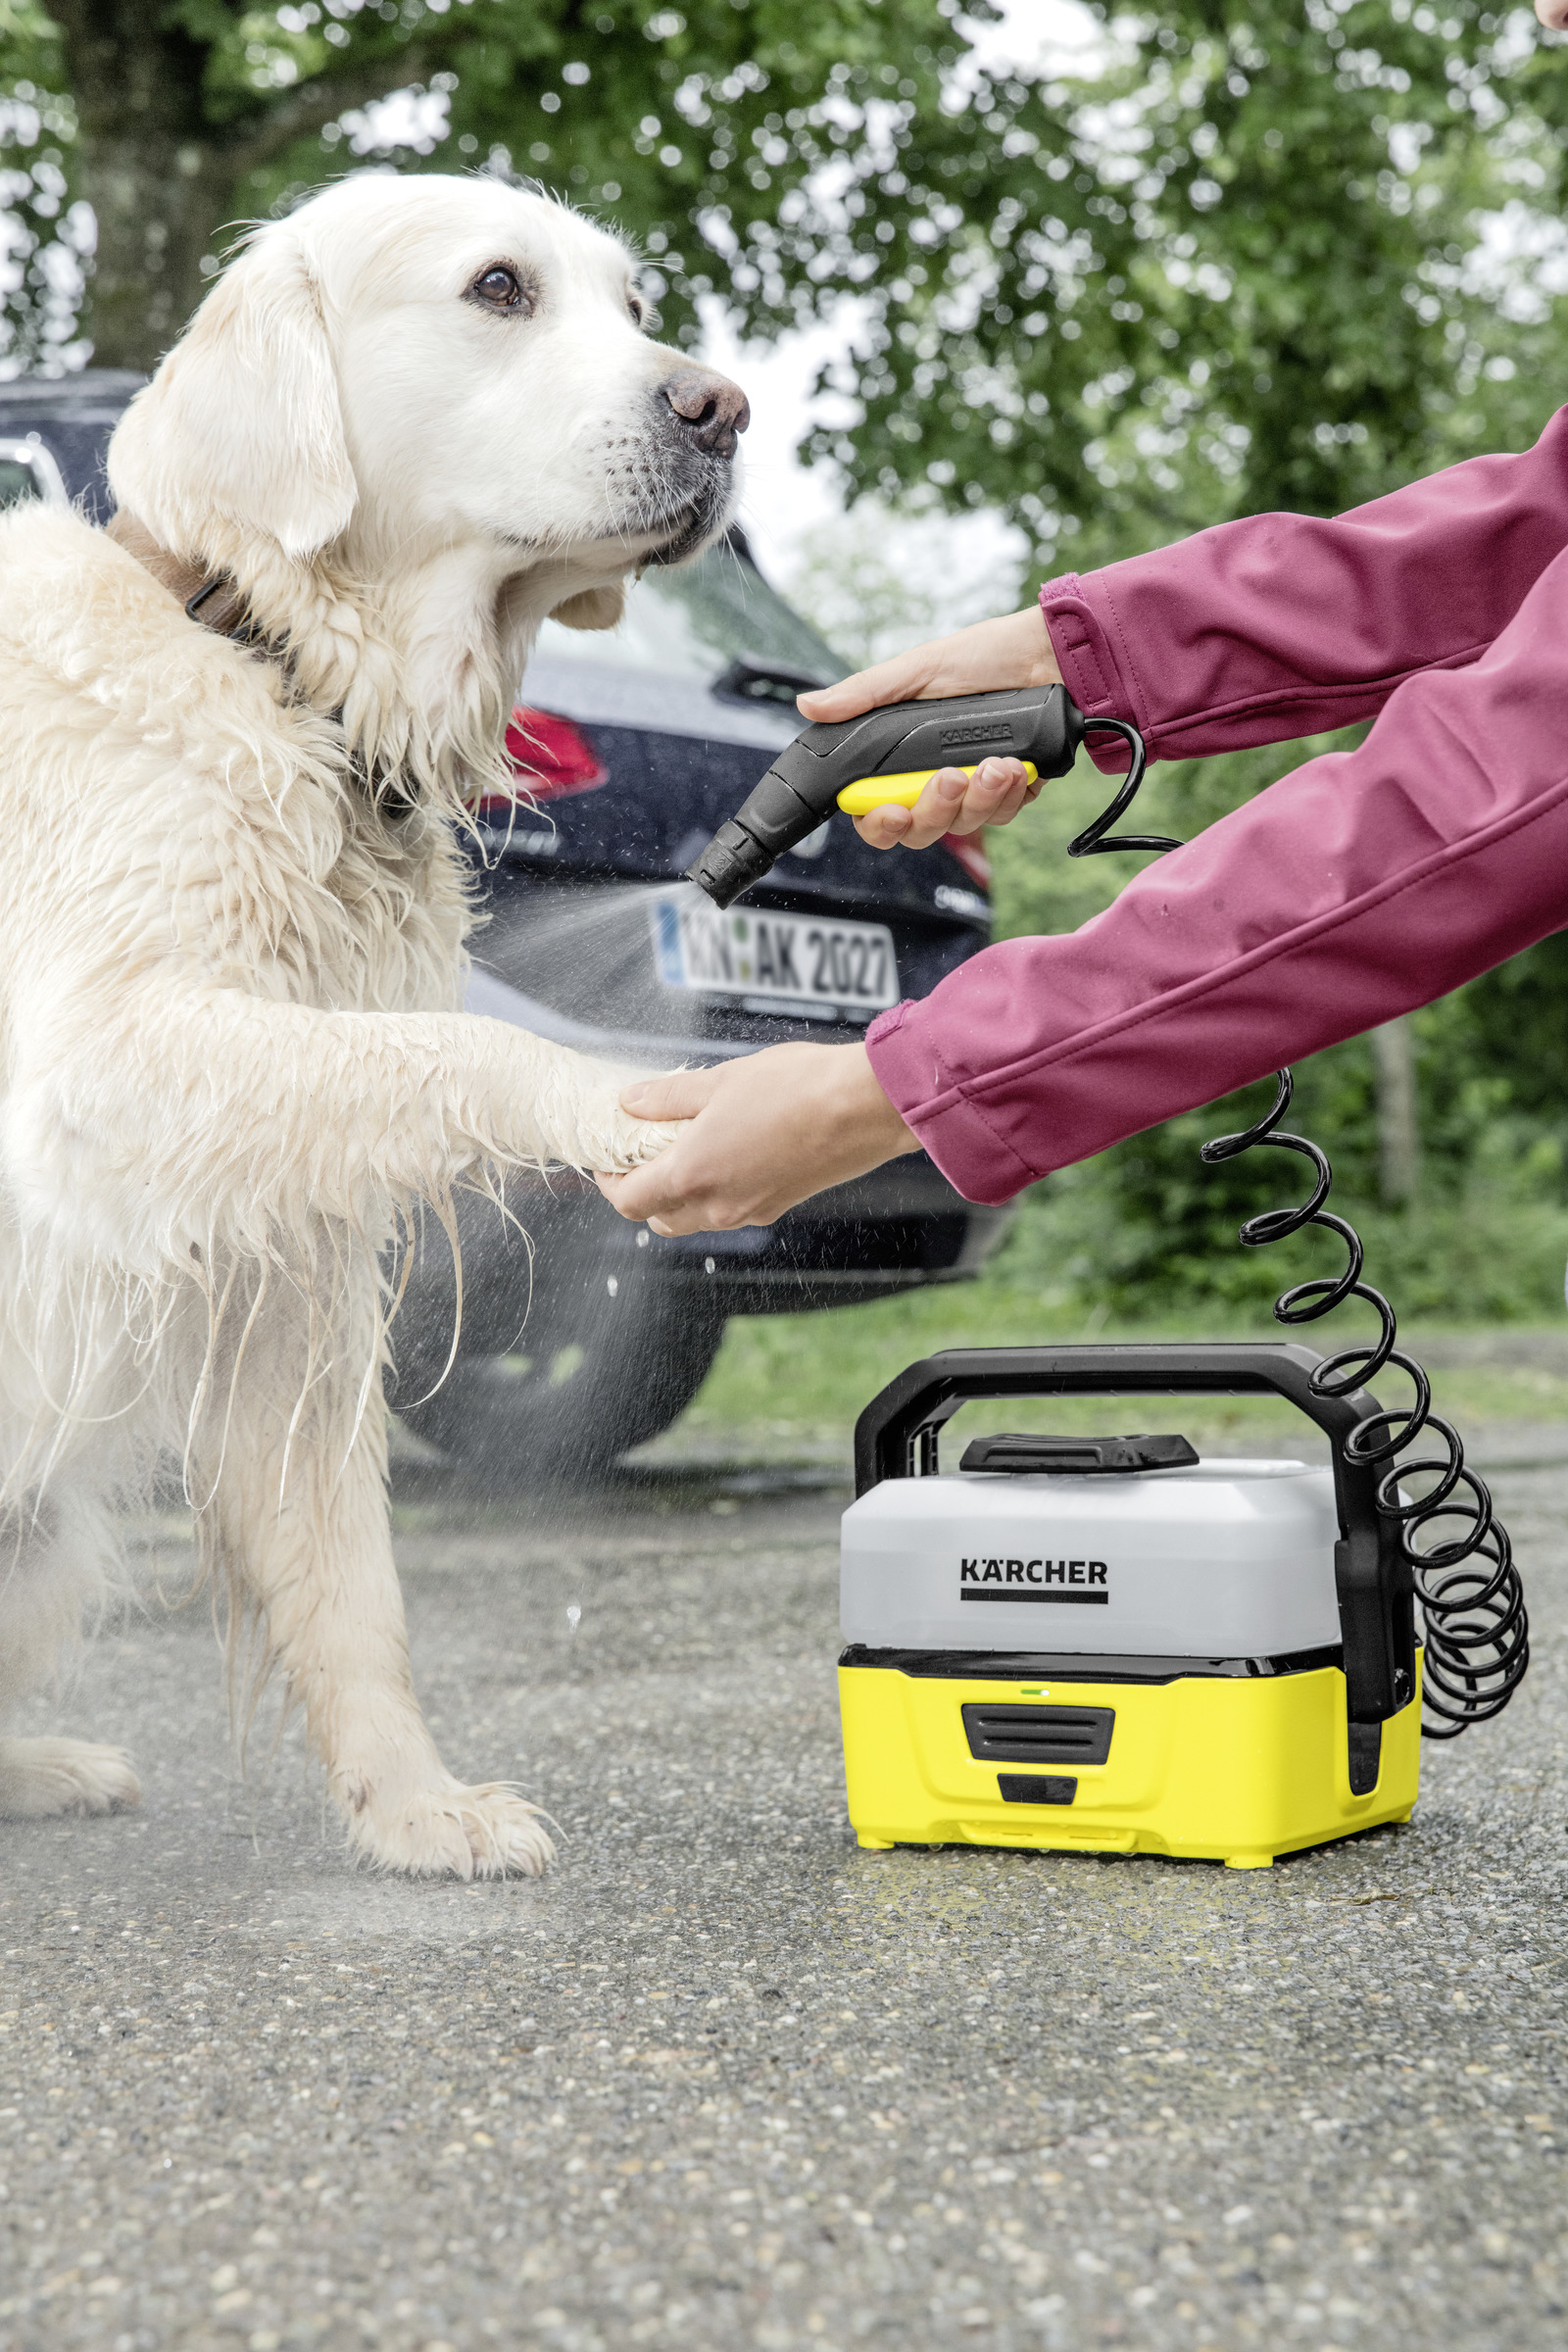 KÄRCHER OC3 Portable Cleaner  CALLING ALL BIKERS, PET OWNERS AND